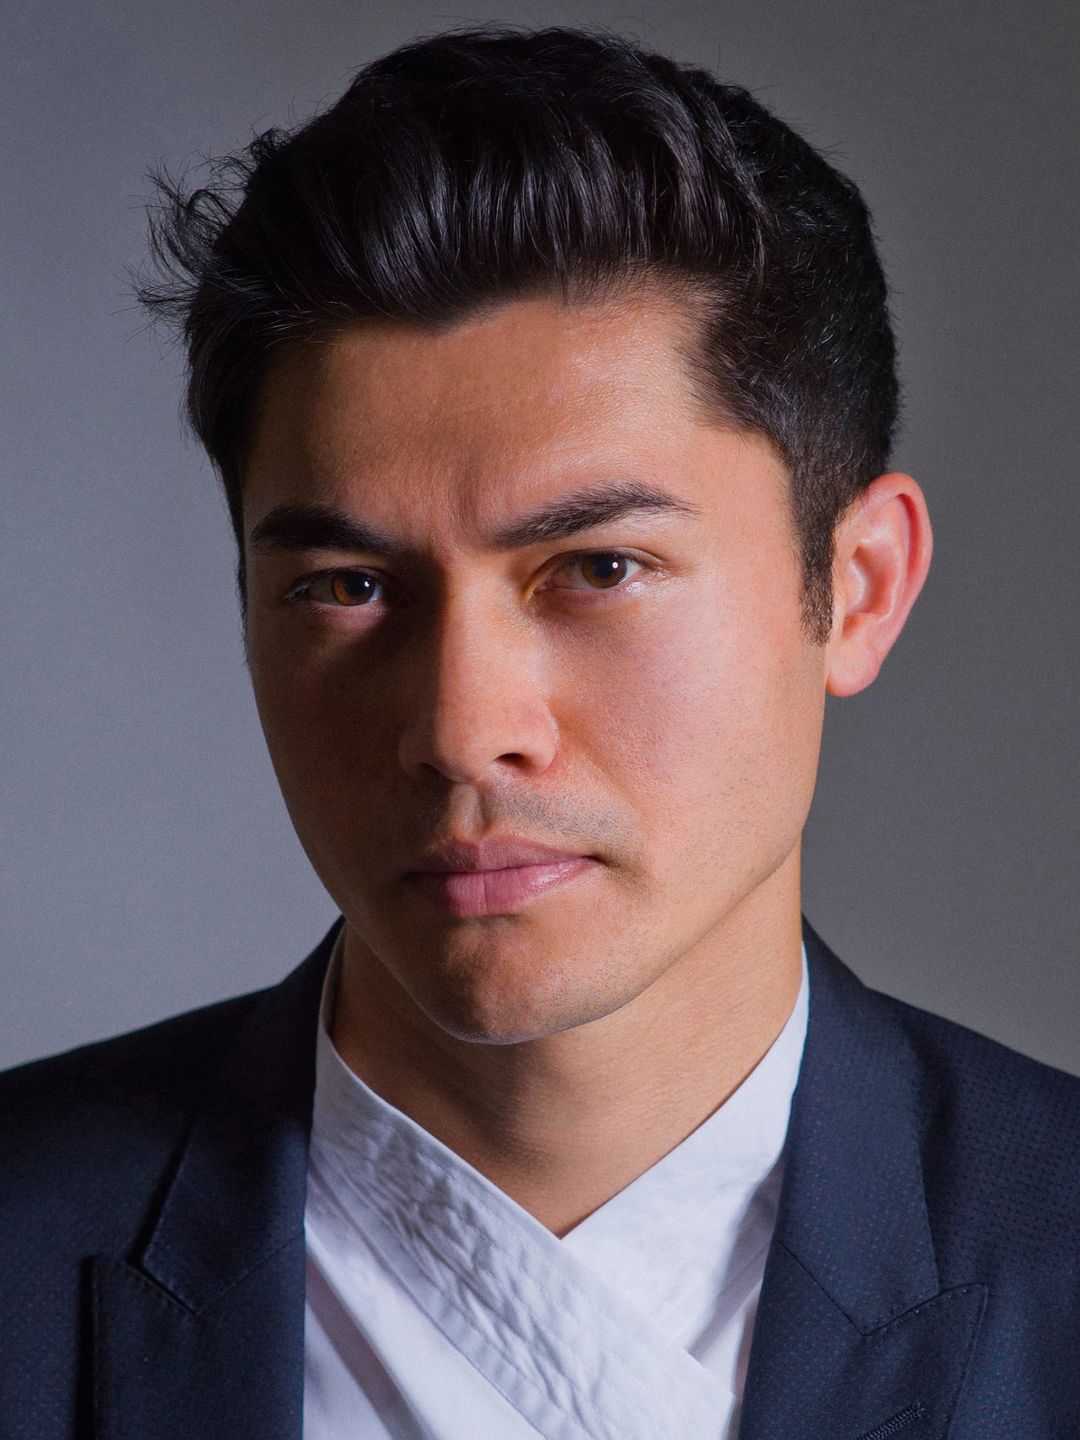 Henry Golding story of success